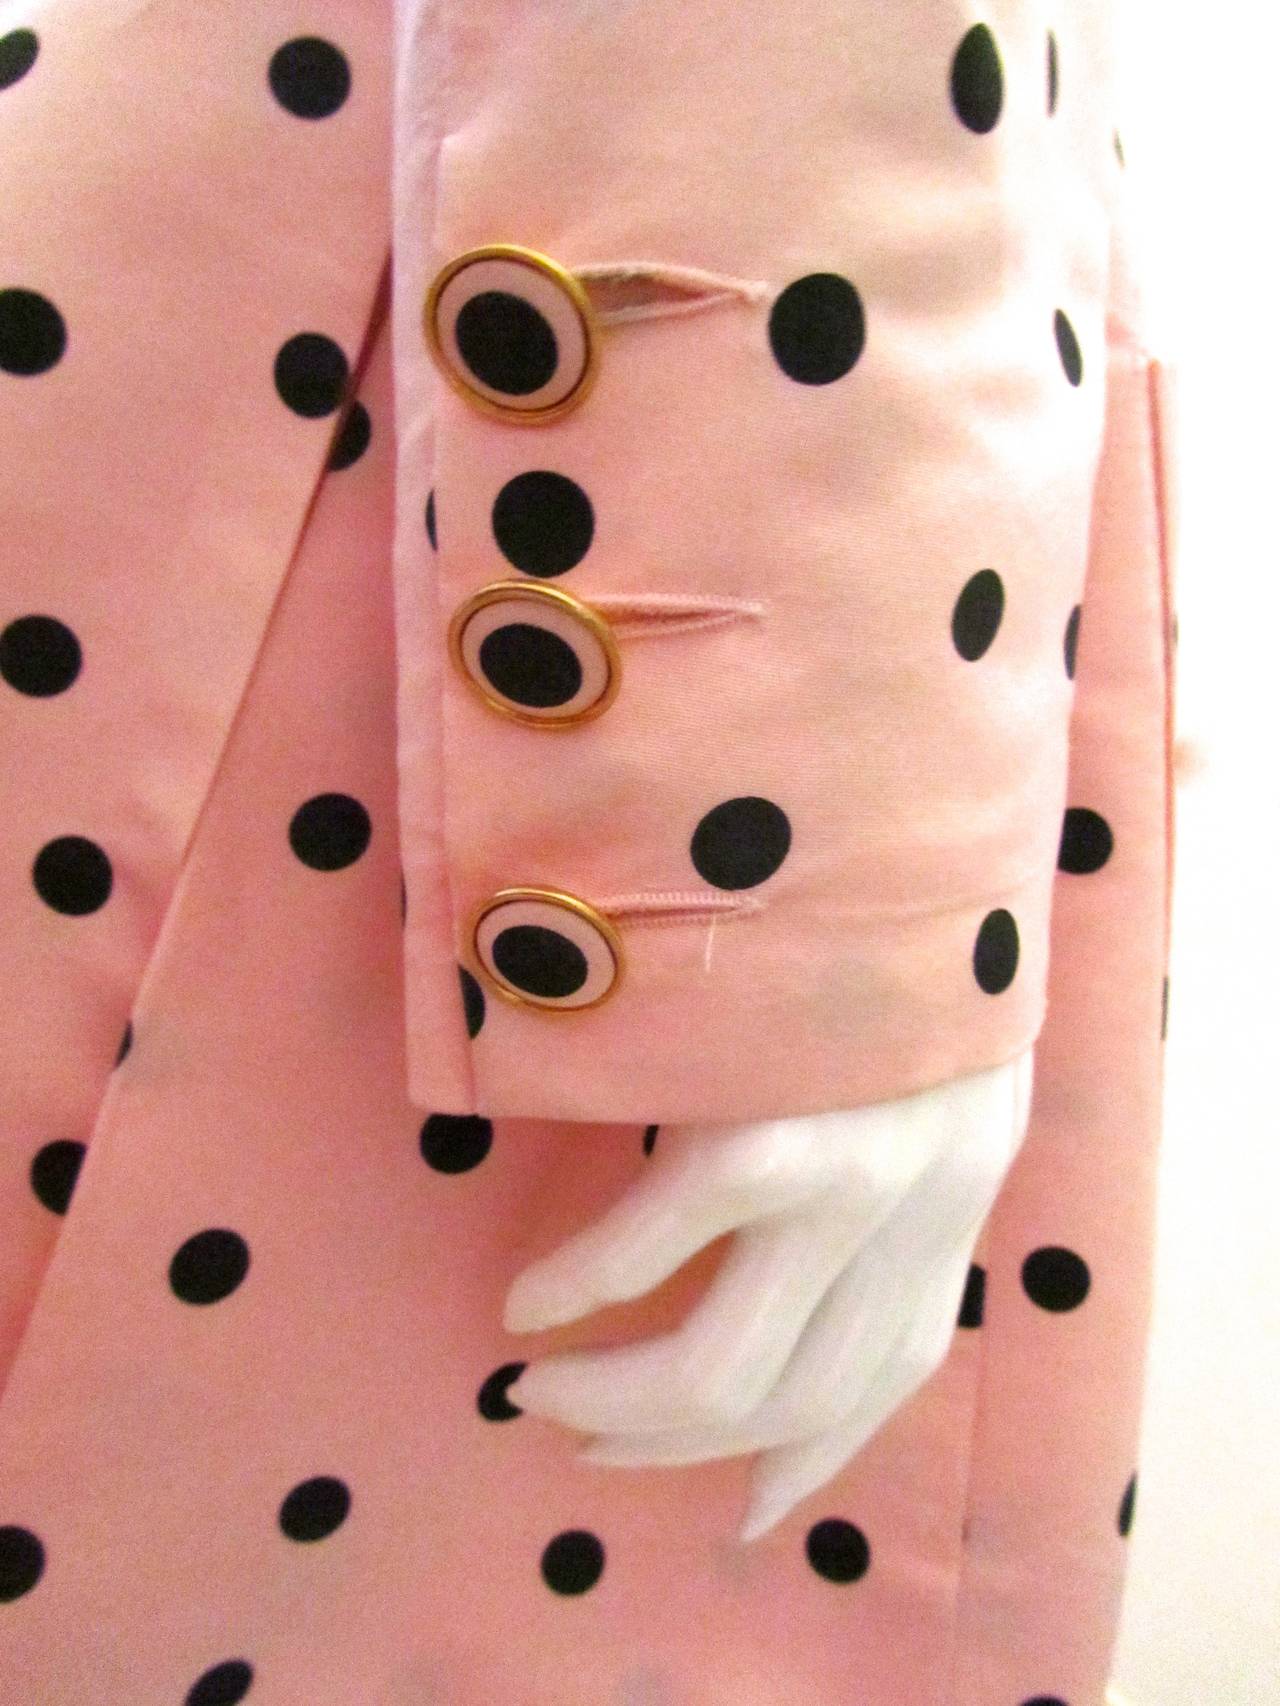 Chanel Pink Blazer with Black Polka Dots In Excellent Condition For Sale In Boca Raton, FL